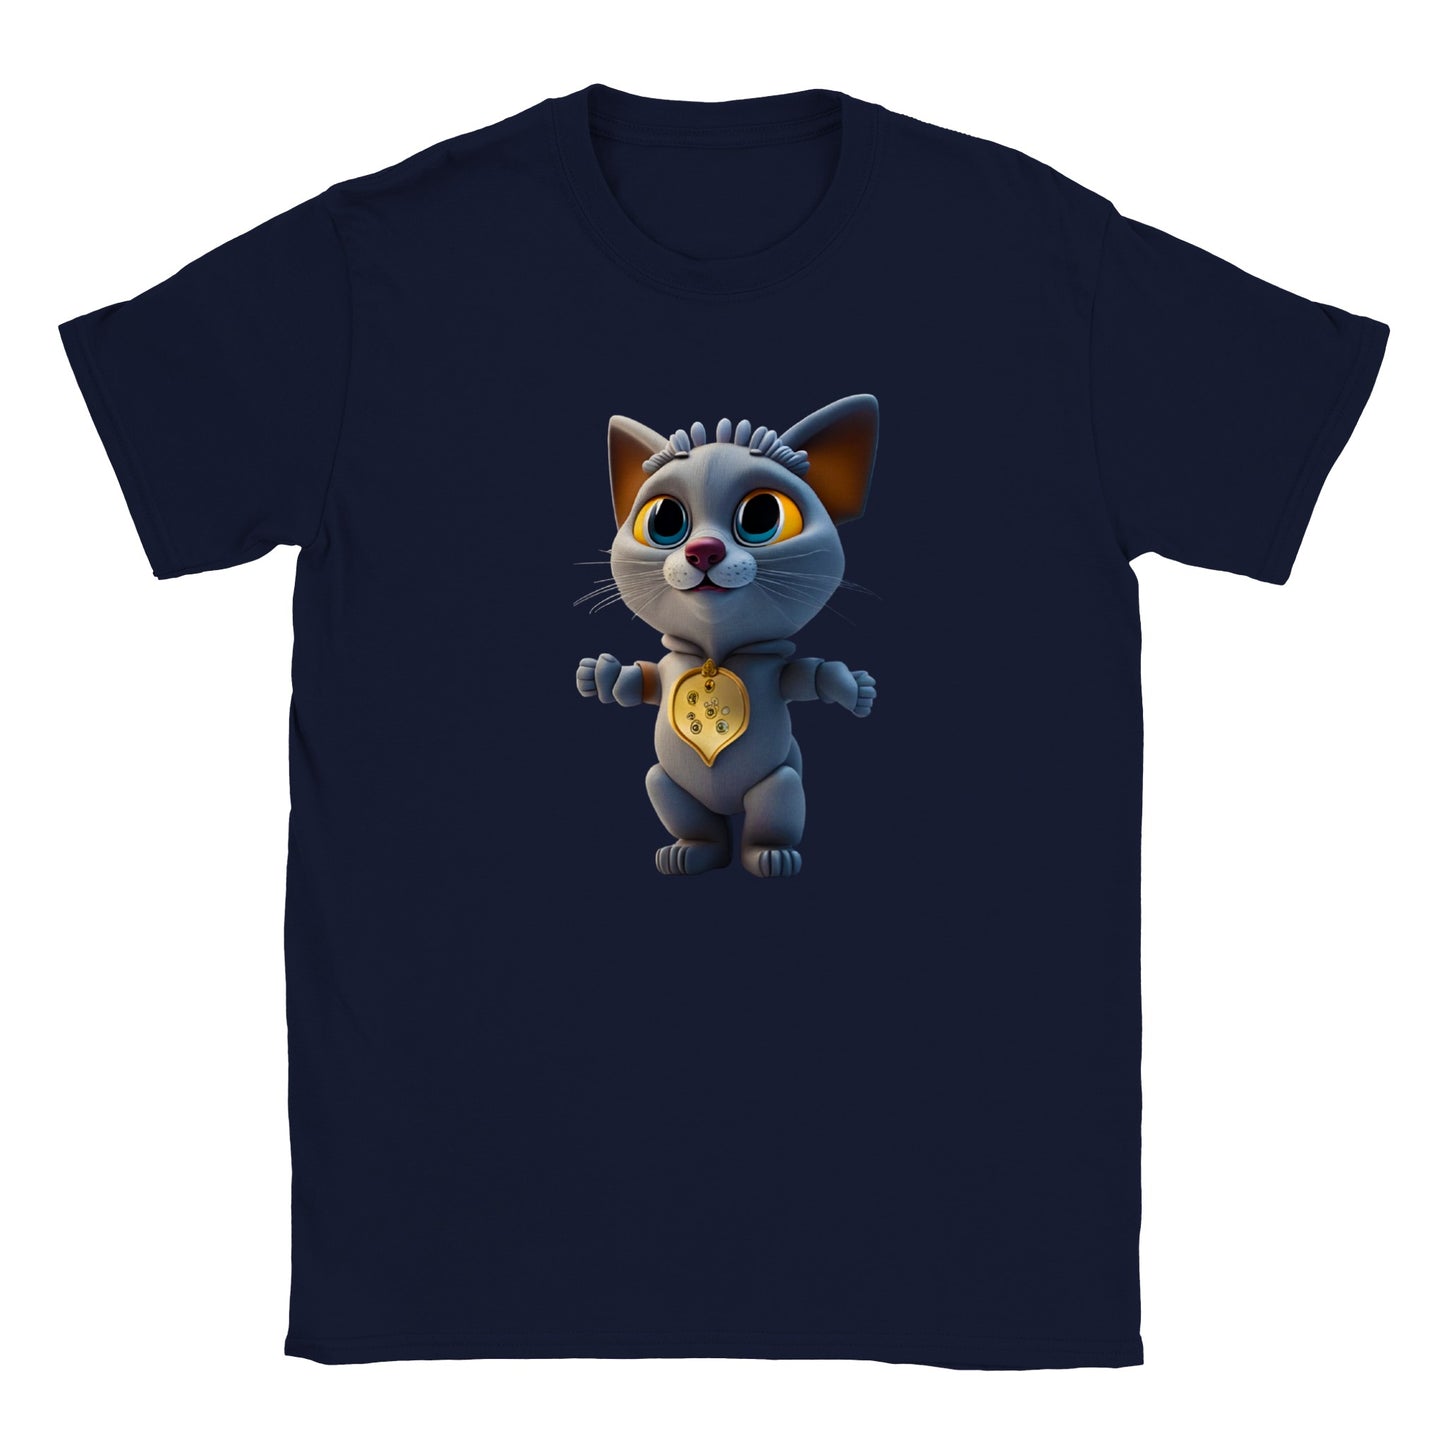 Adorable, Cool, Cute Cats and Kittens Toy - Classic Kids Crewneck T-Shirt 56